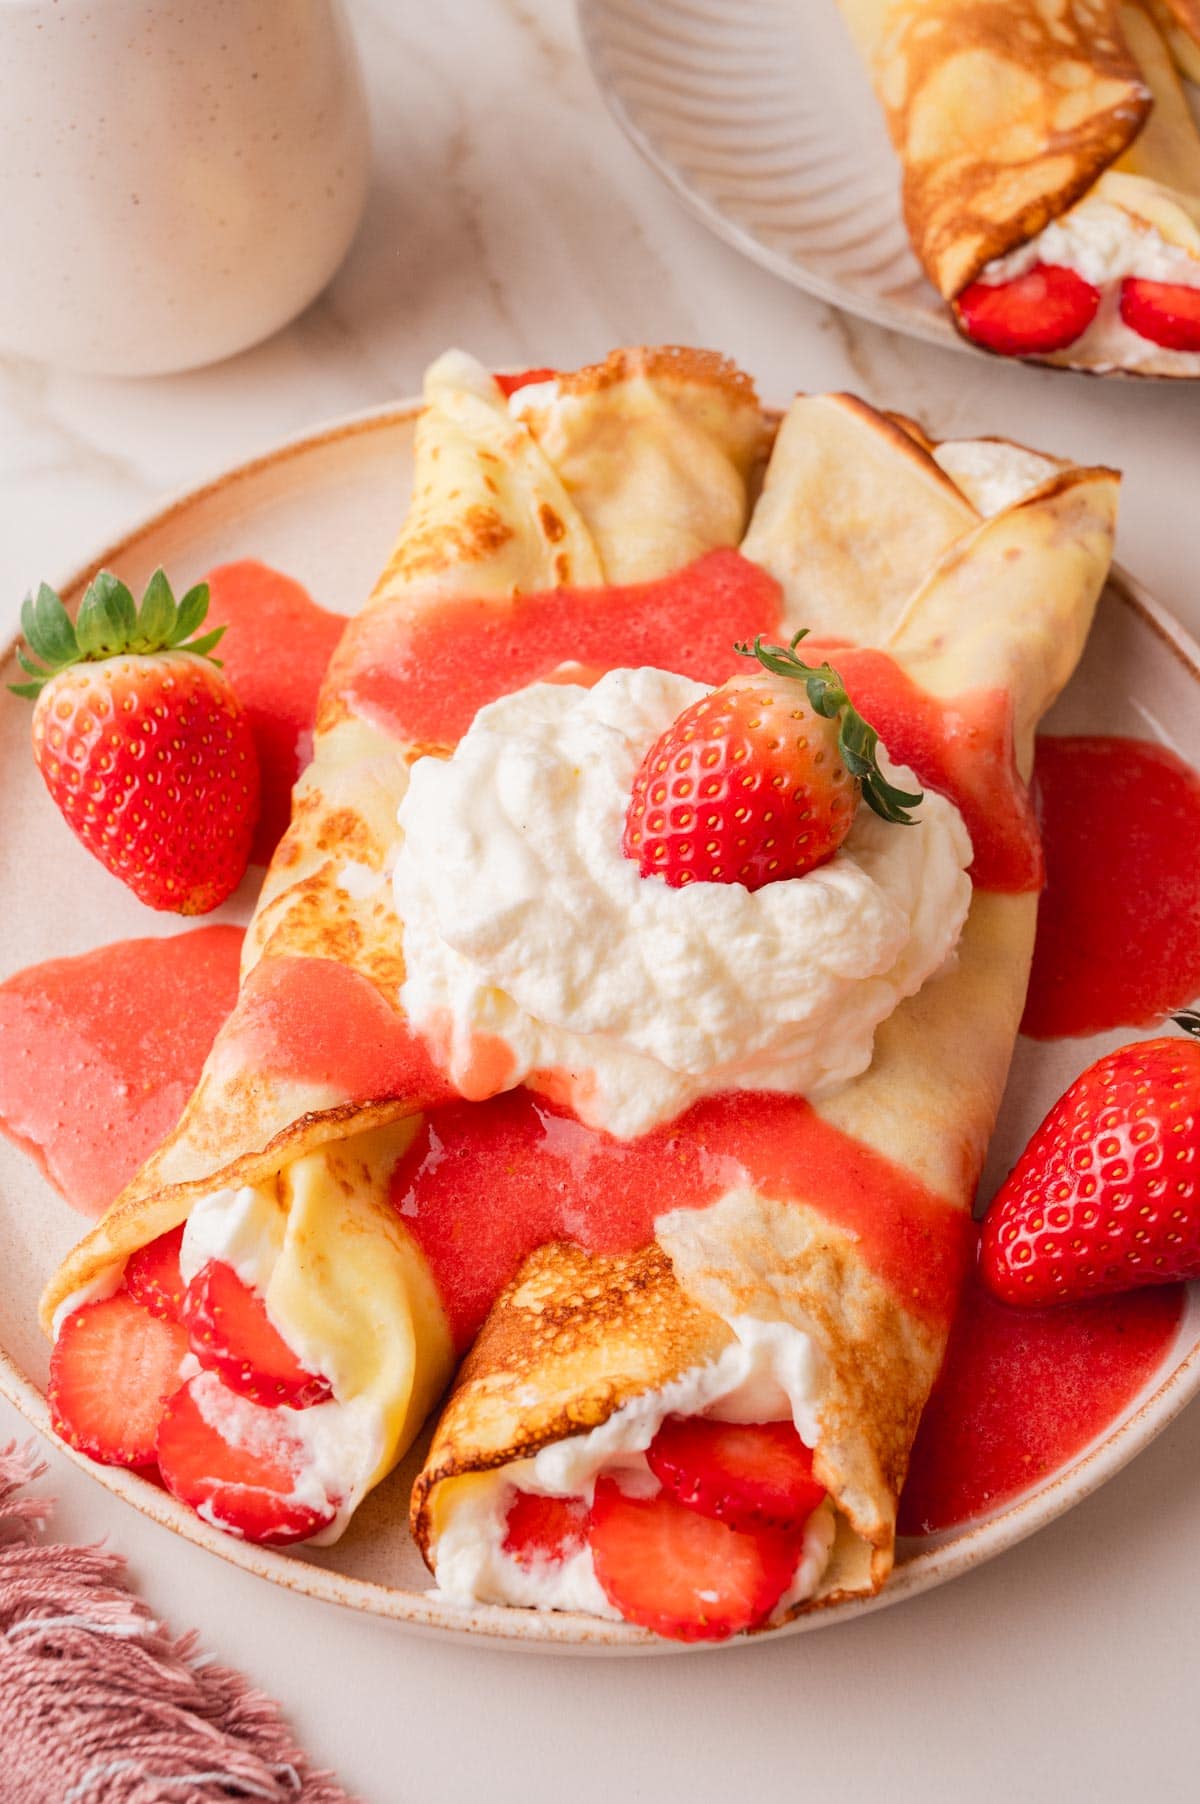 Crepes filled with whipped cream and fresh strawberries, served with strawberry sauce.